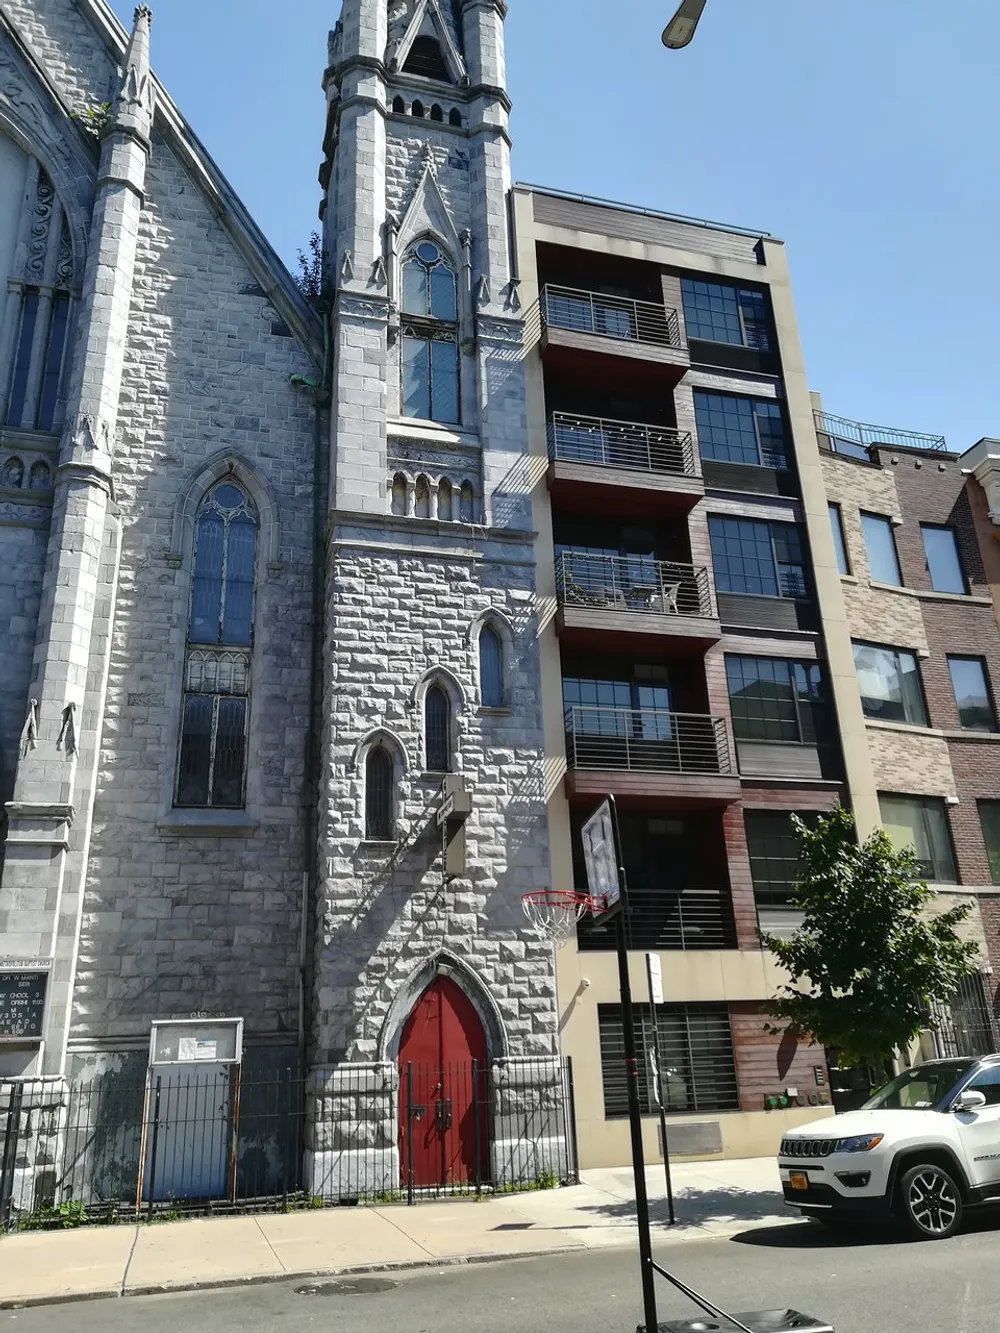 The image shows a contrast between a traditional stone church with a red door and a modern residential building with balconies under a clear blue sky